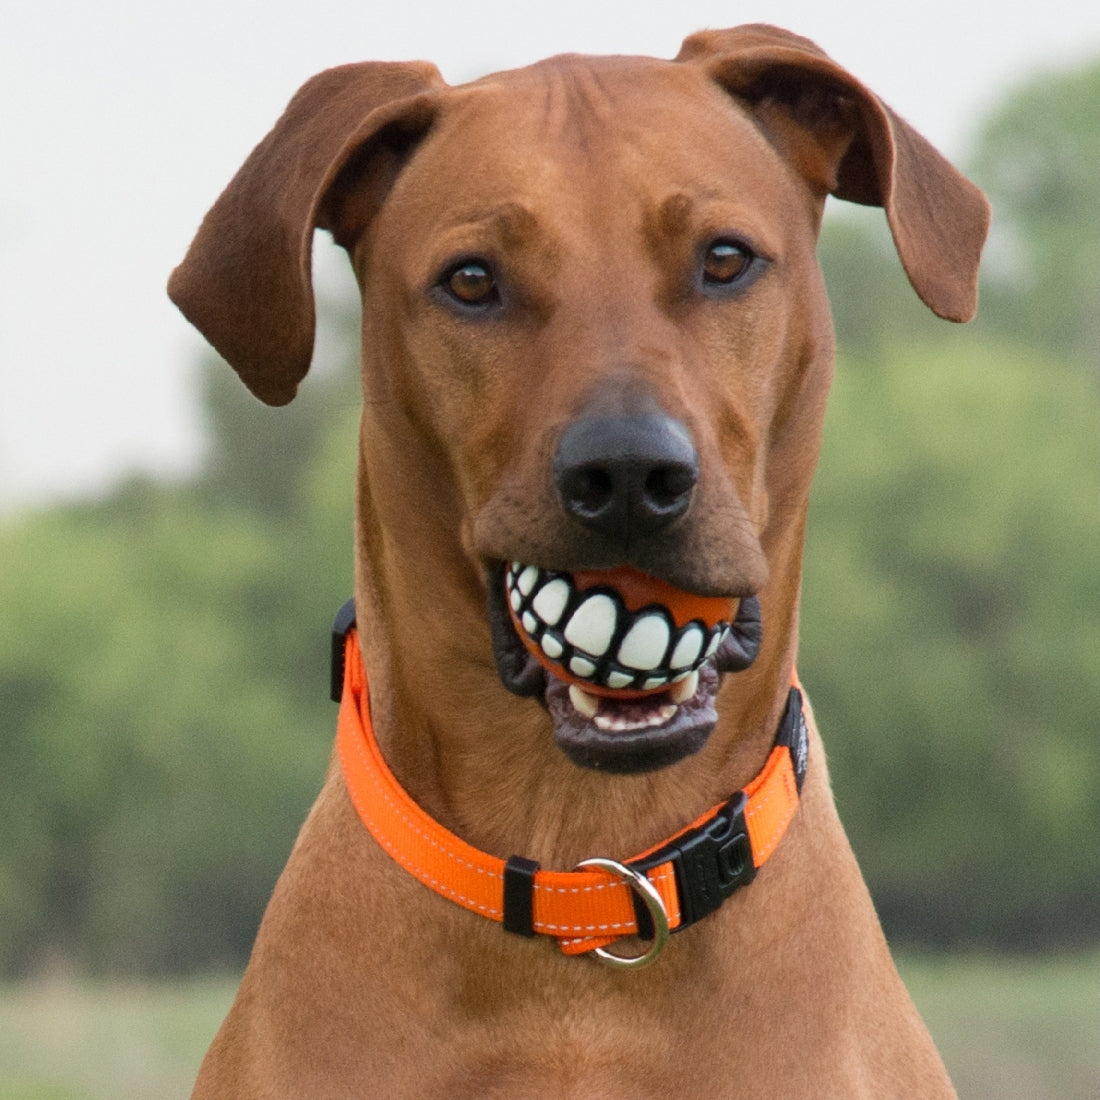 Brown dog wearing a Rogz collar, smiling with a ball.